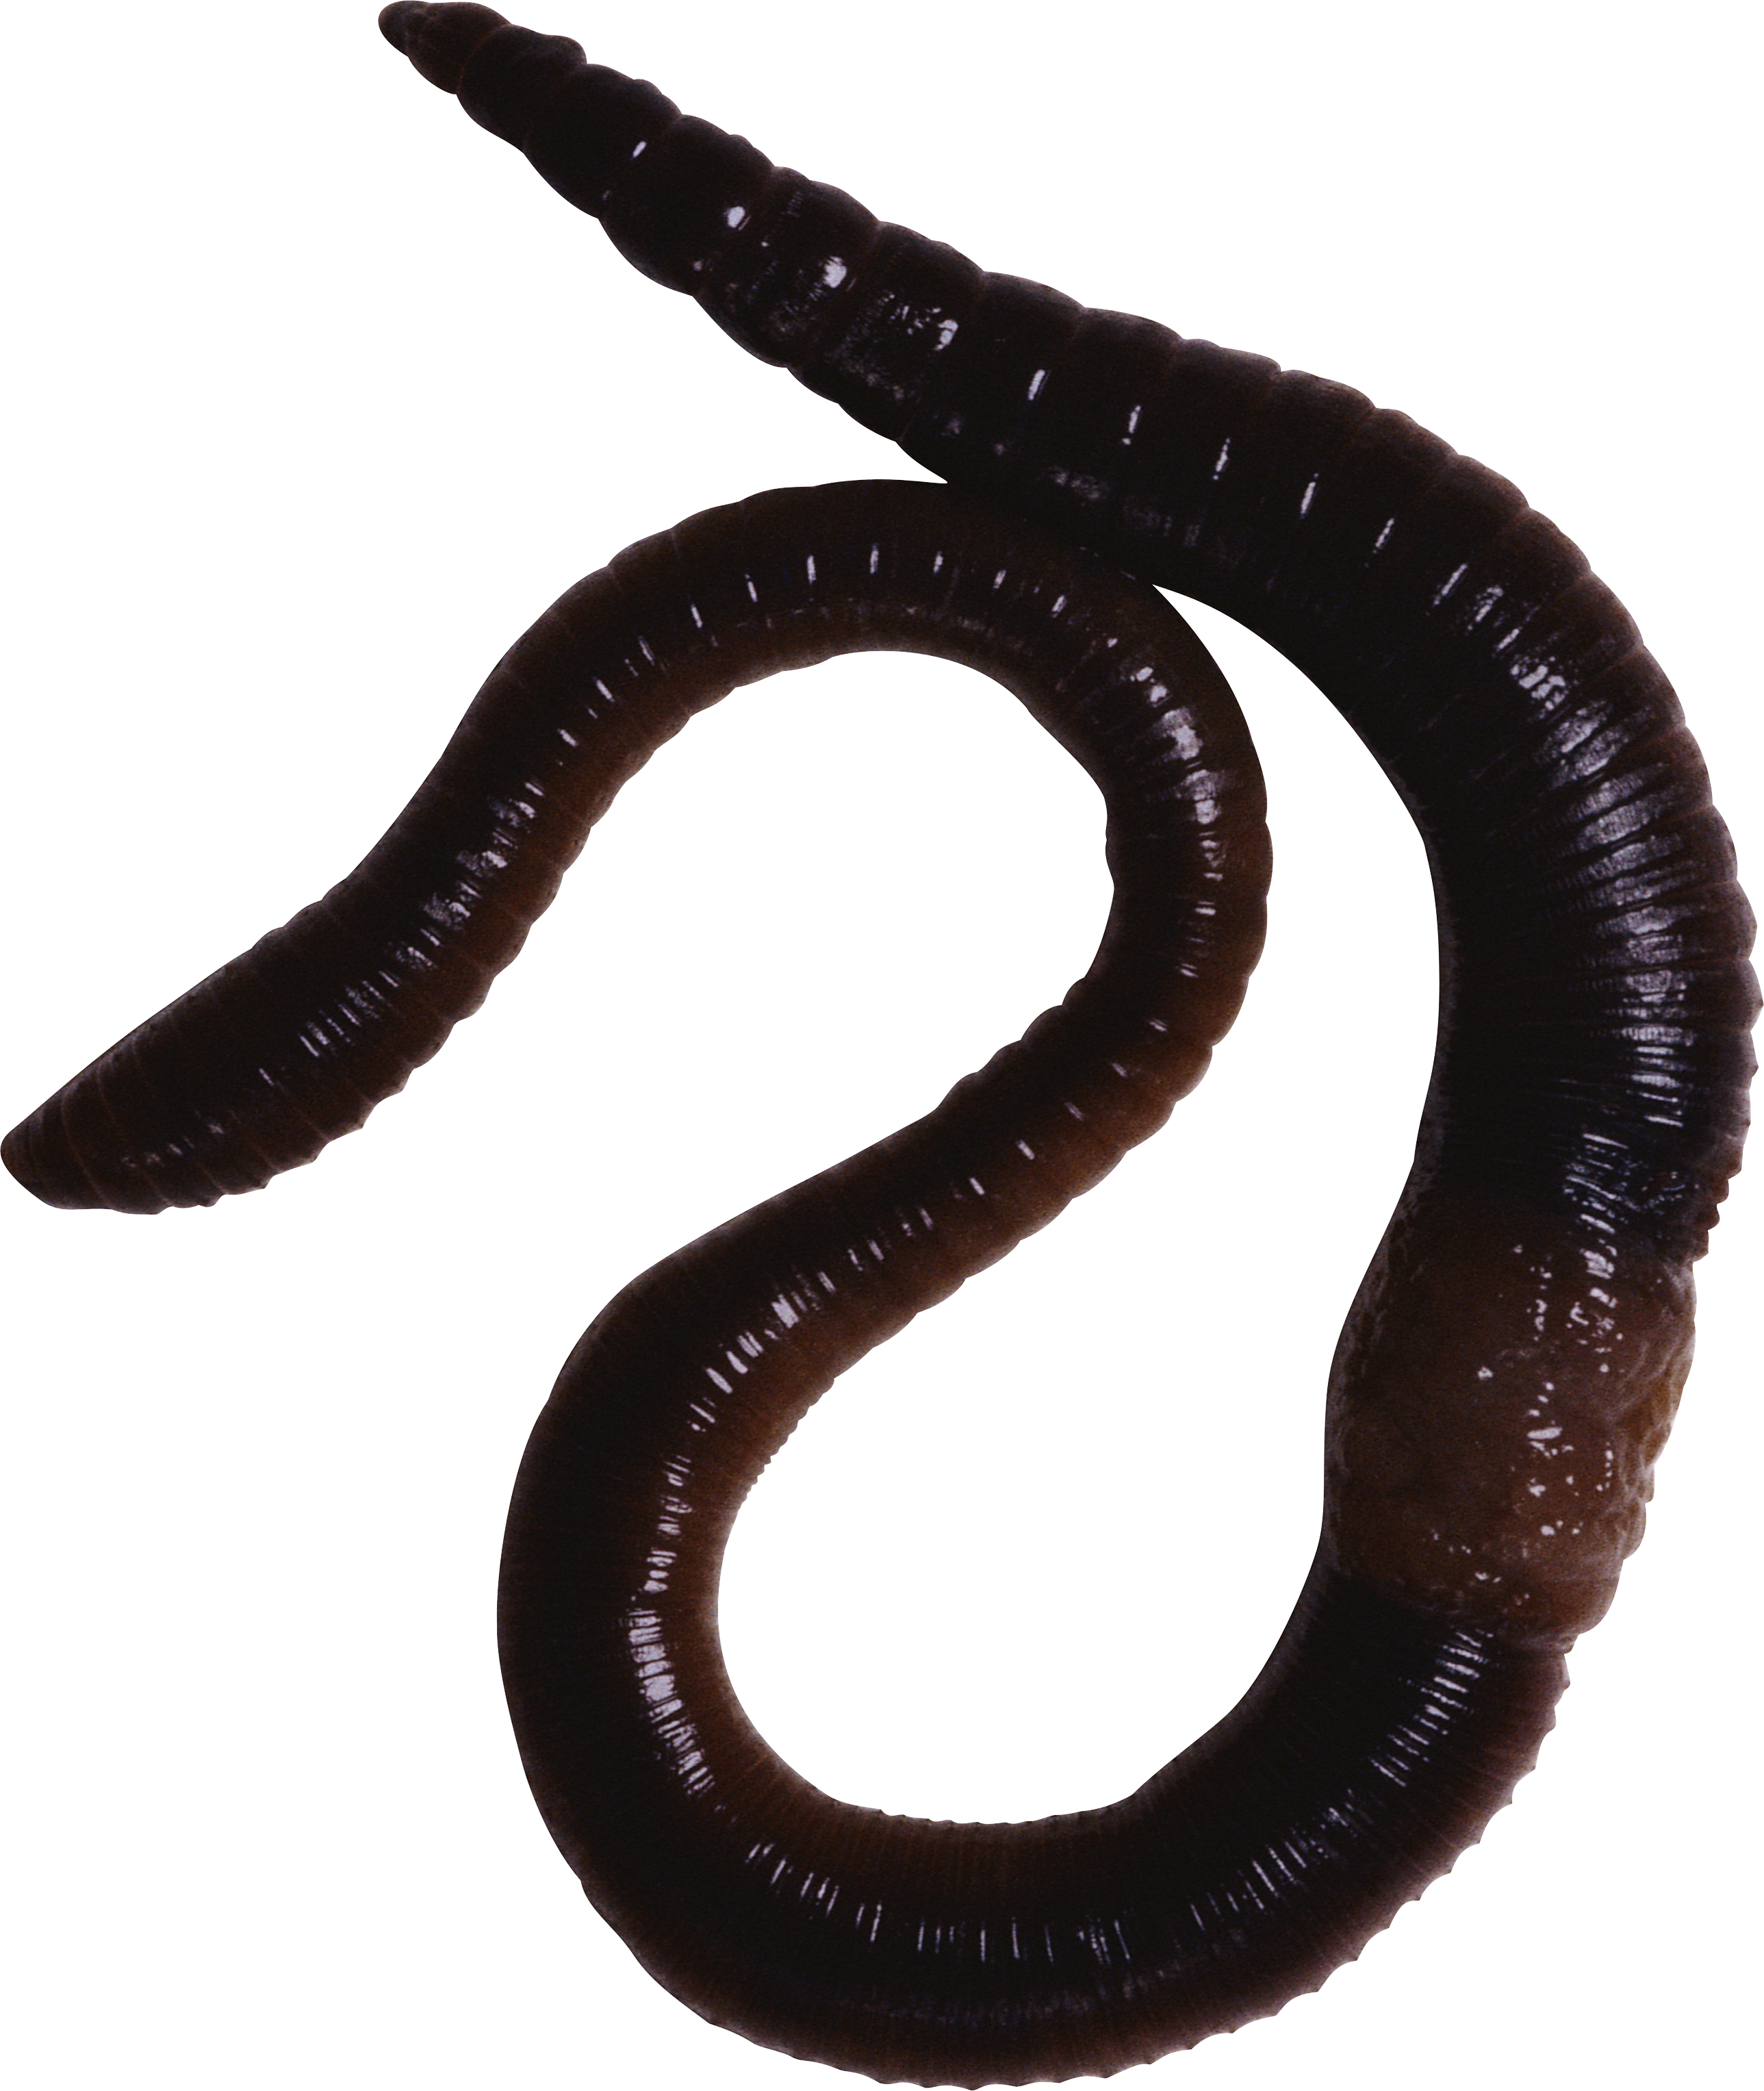 Worm clipart annelida. Worms png images free